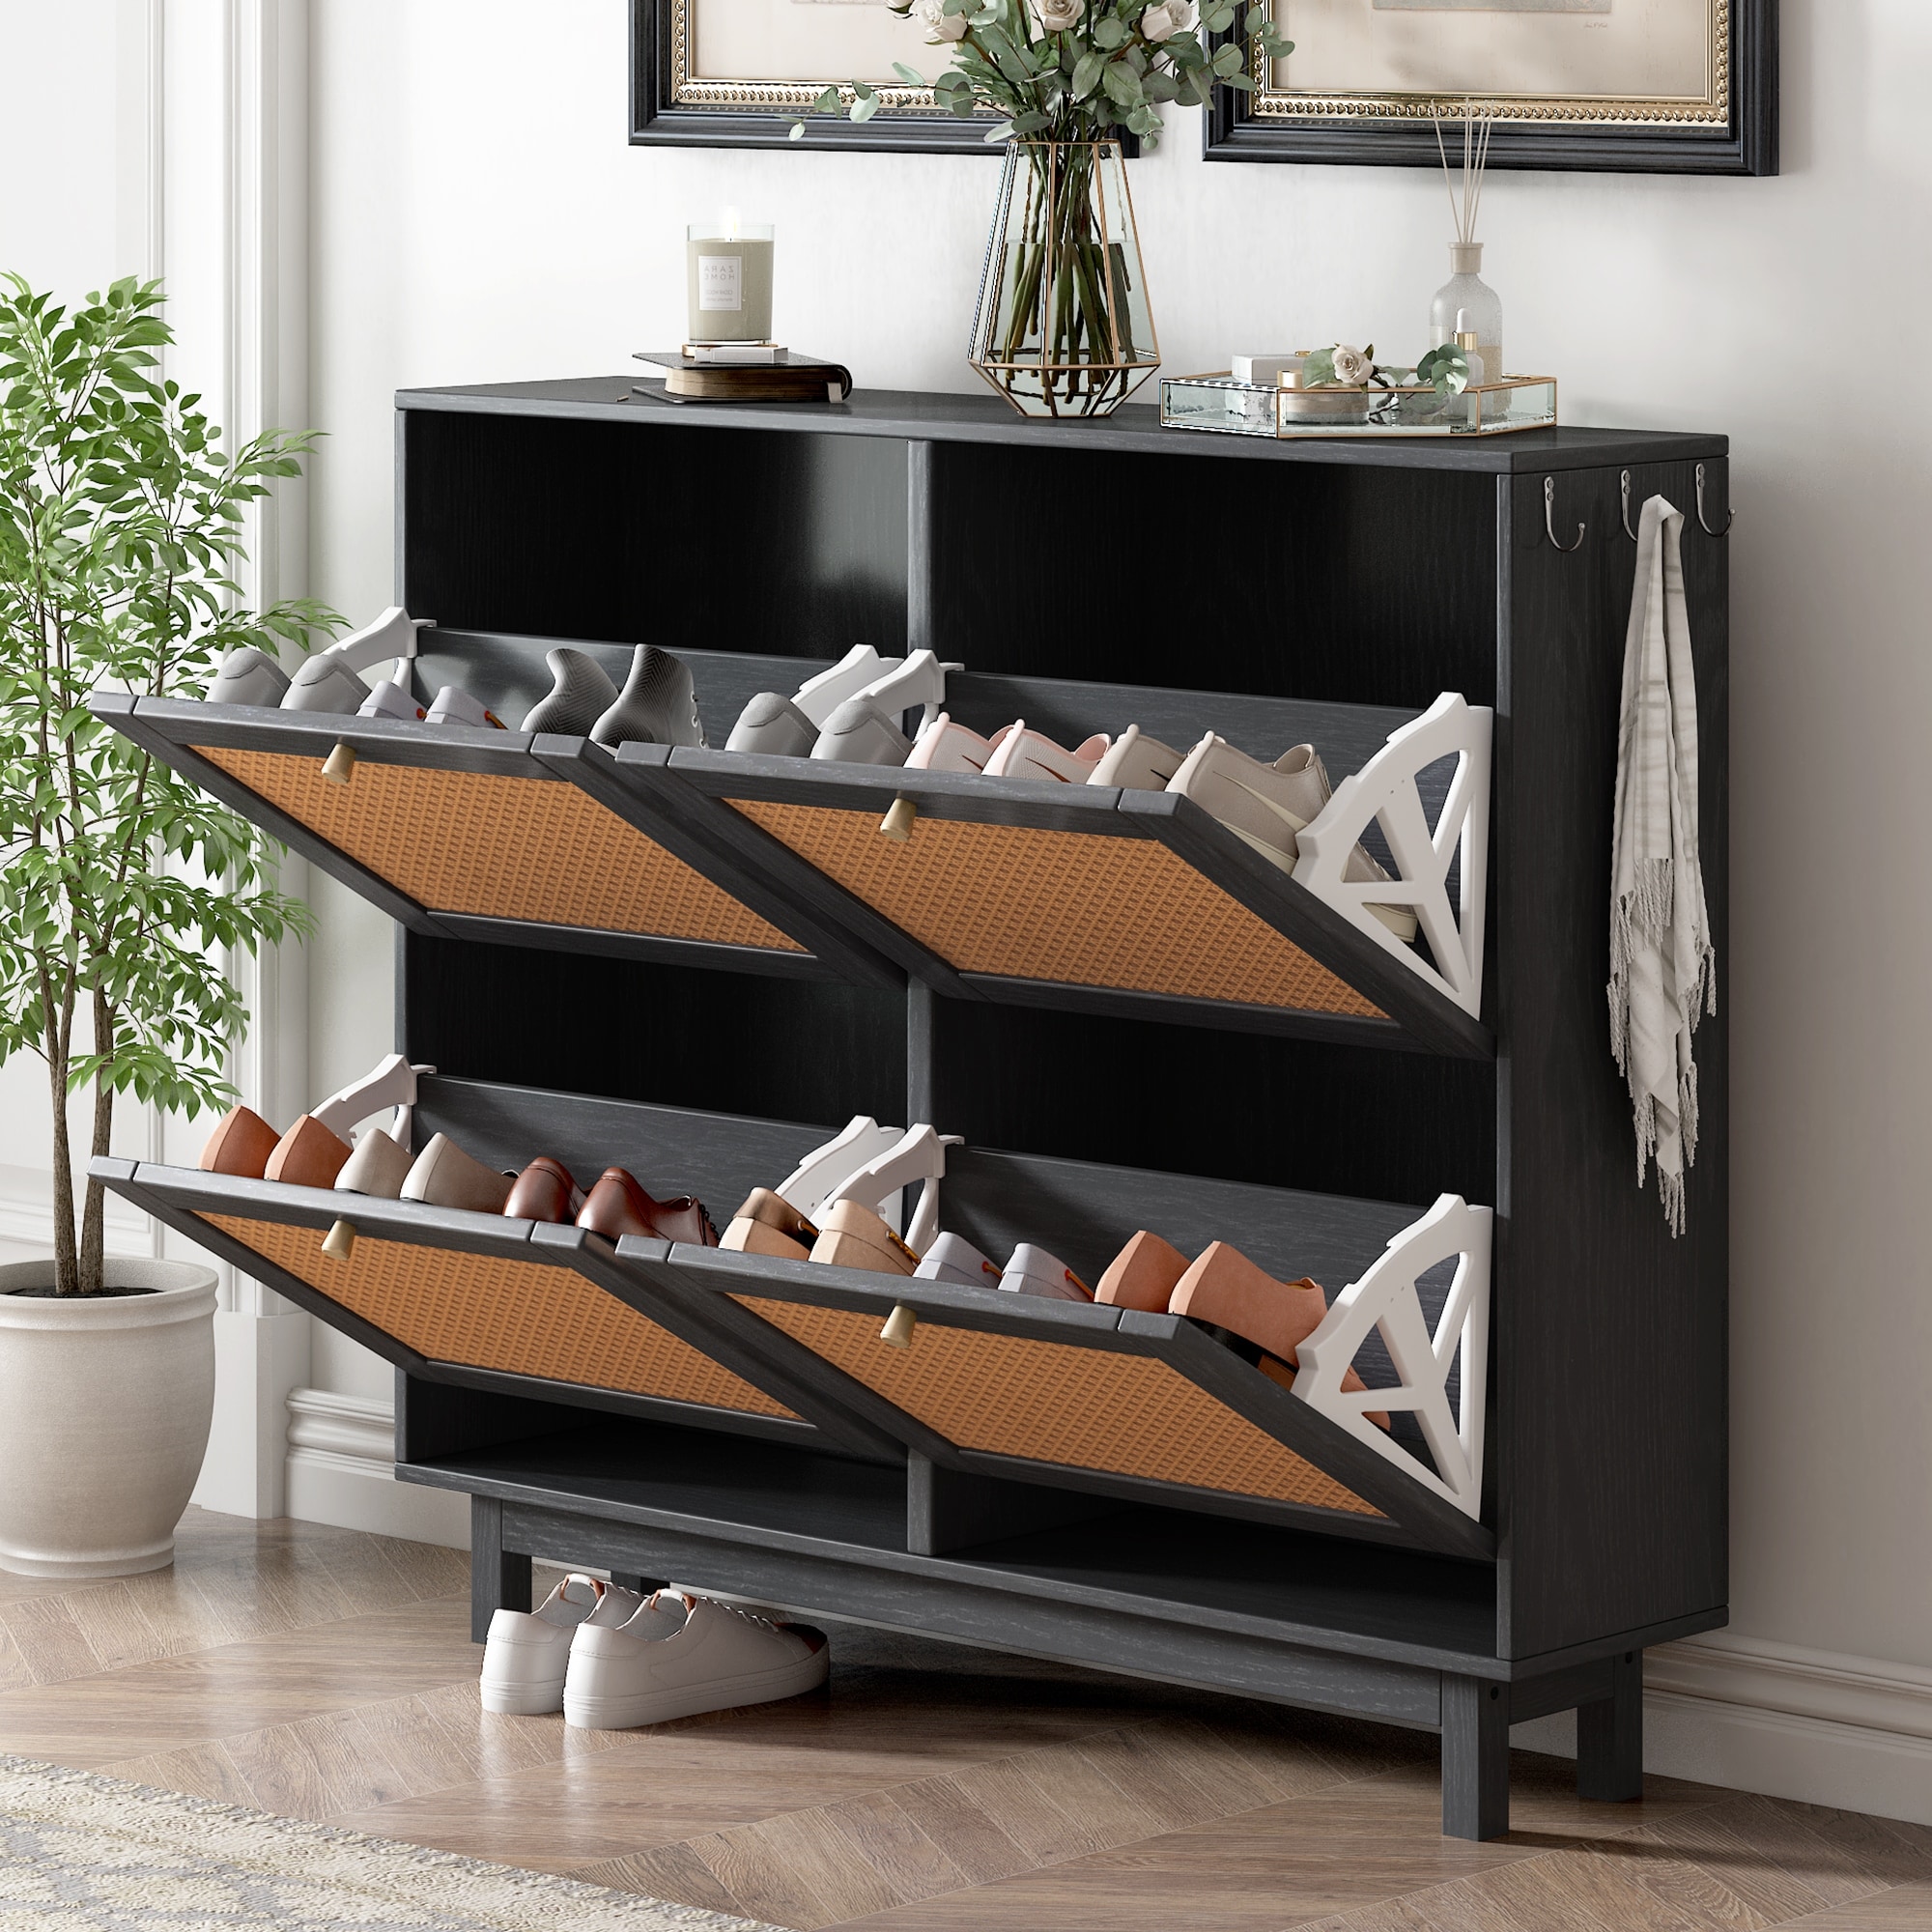 https://ak1.ostkcdn.com/images/products/is/images/direct/a89589919bdea9acecb48761a541c87740d9d9d0/Rattan-Shoe-Cabinet-with-4-Flip-Drawers%2C-2-Tier-Shoe-Storage-Organizer%2C-Free-Standing-Shoe-Rack.jpg